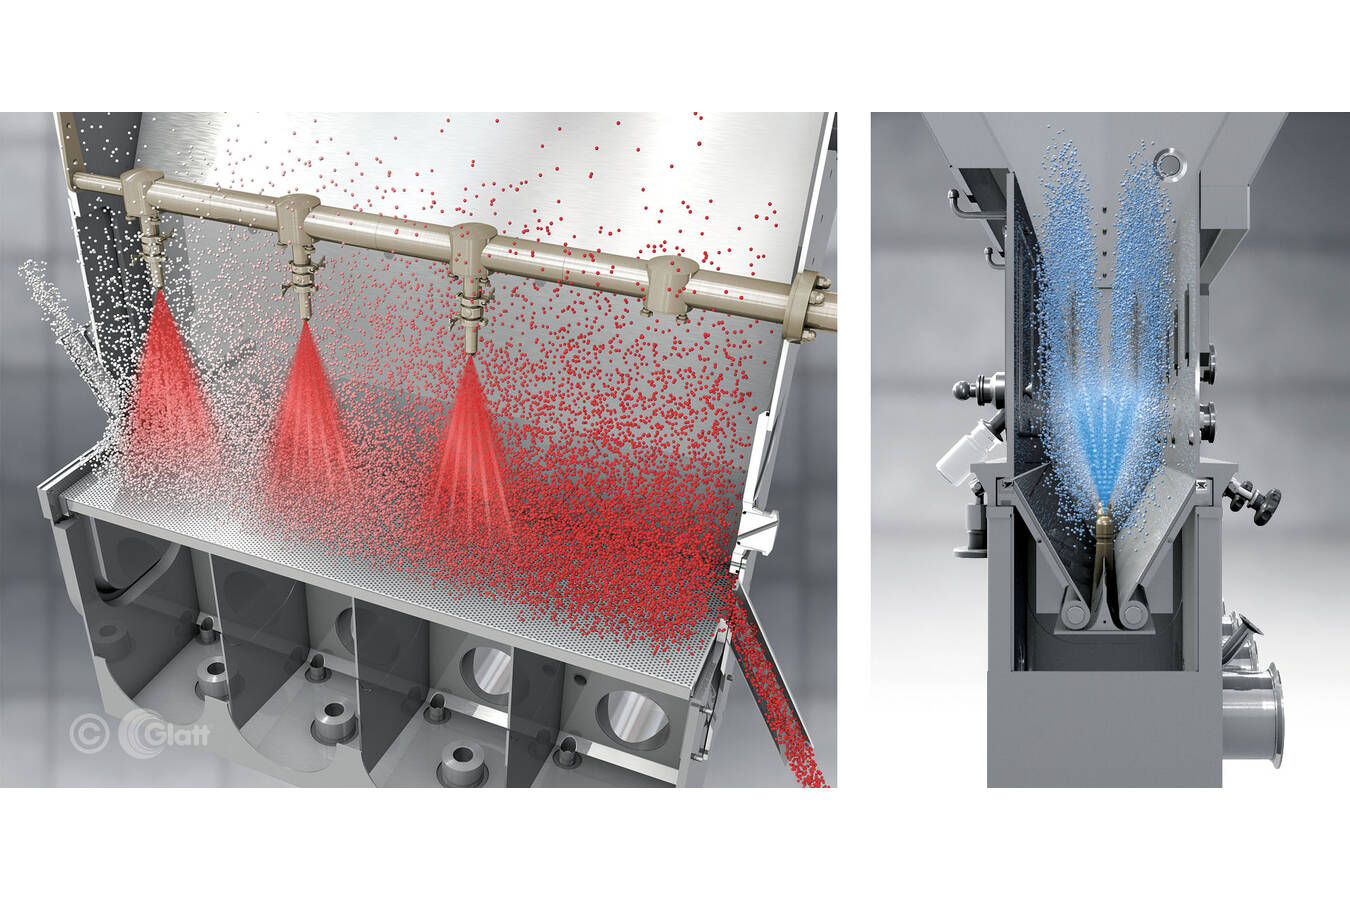 Figures 2 + 3: Continuous fluid bed process, pictured on the left is the top spray option with four process chambers, and continuous spouted bed process with bottom spray option (on the right).